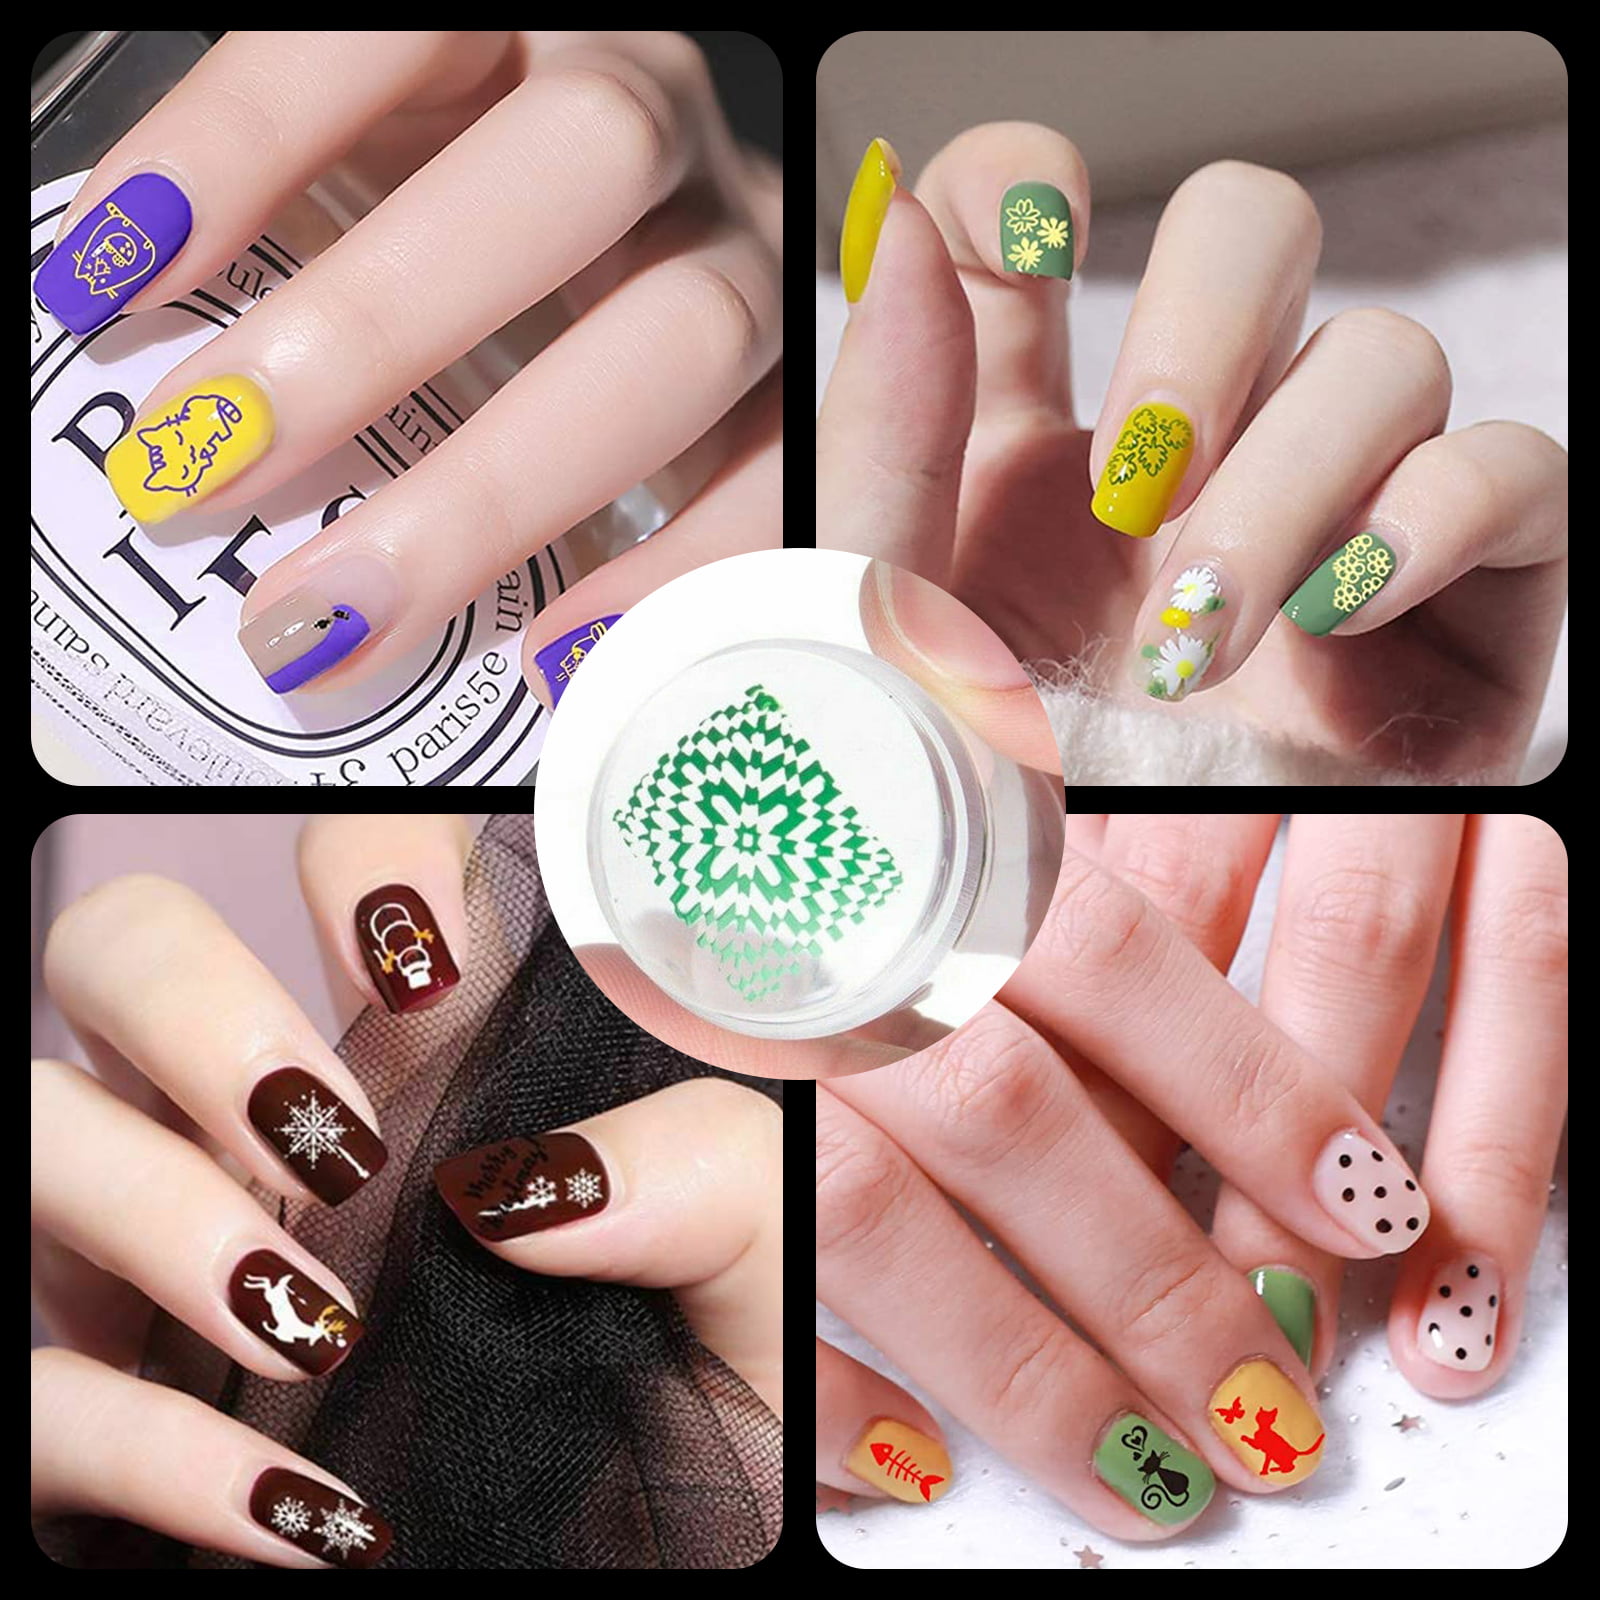 Simple nail art❤ DIY nail art without any tools 💖💅 You tube 👉Rimi's  Creations You tube full video link 👉https://youtu.be/PIN-1p_hSiM |  Instagram